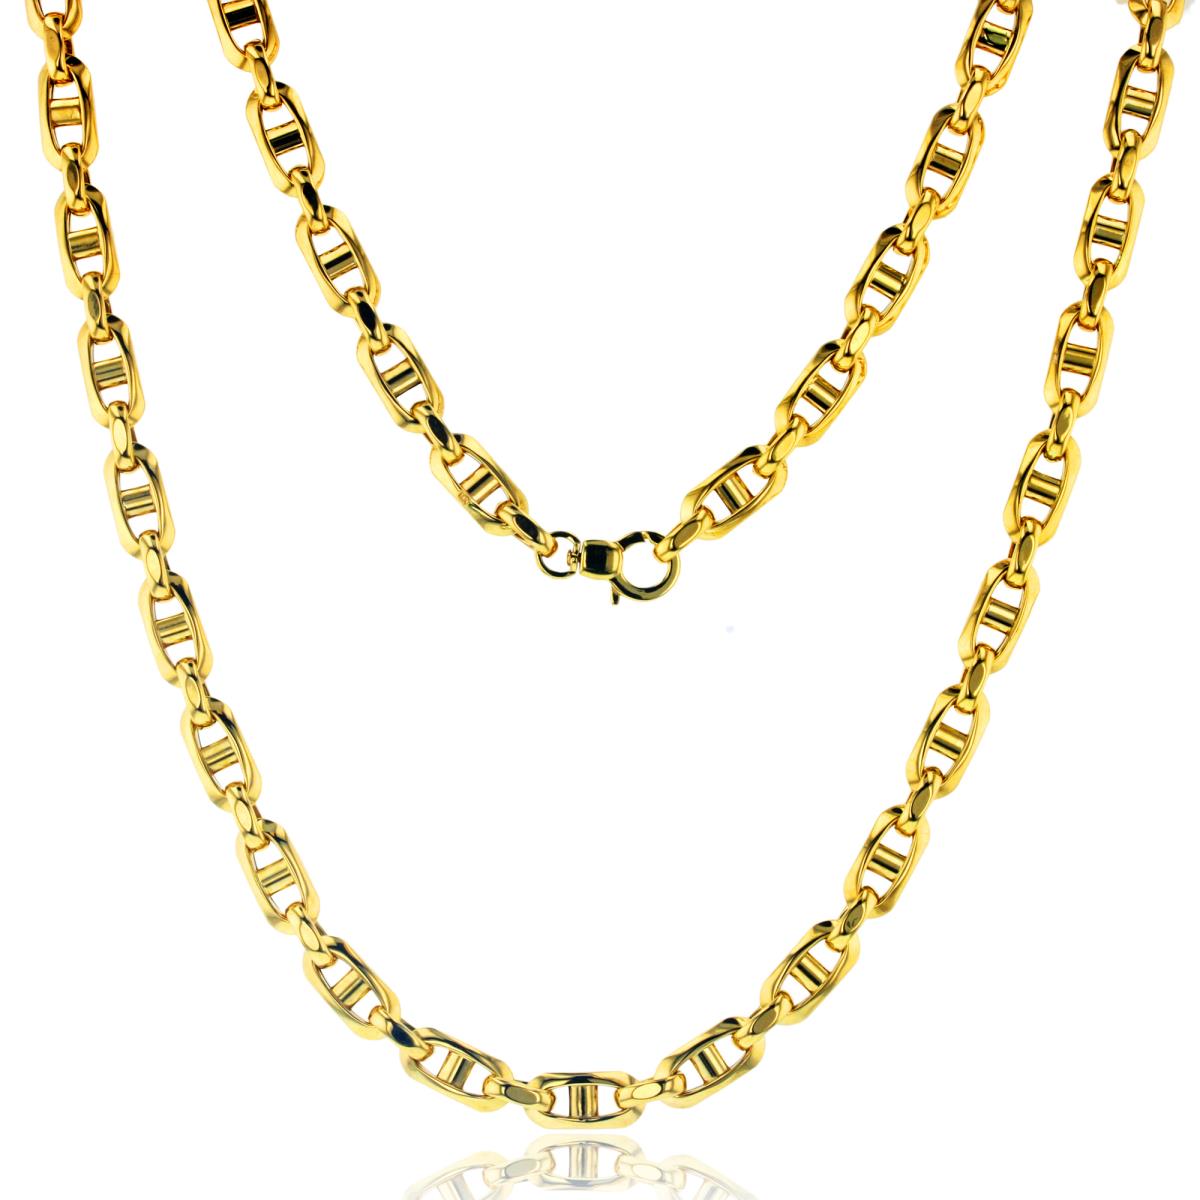 10K Yellow Gold Polished Mariner Links 24" Chain